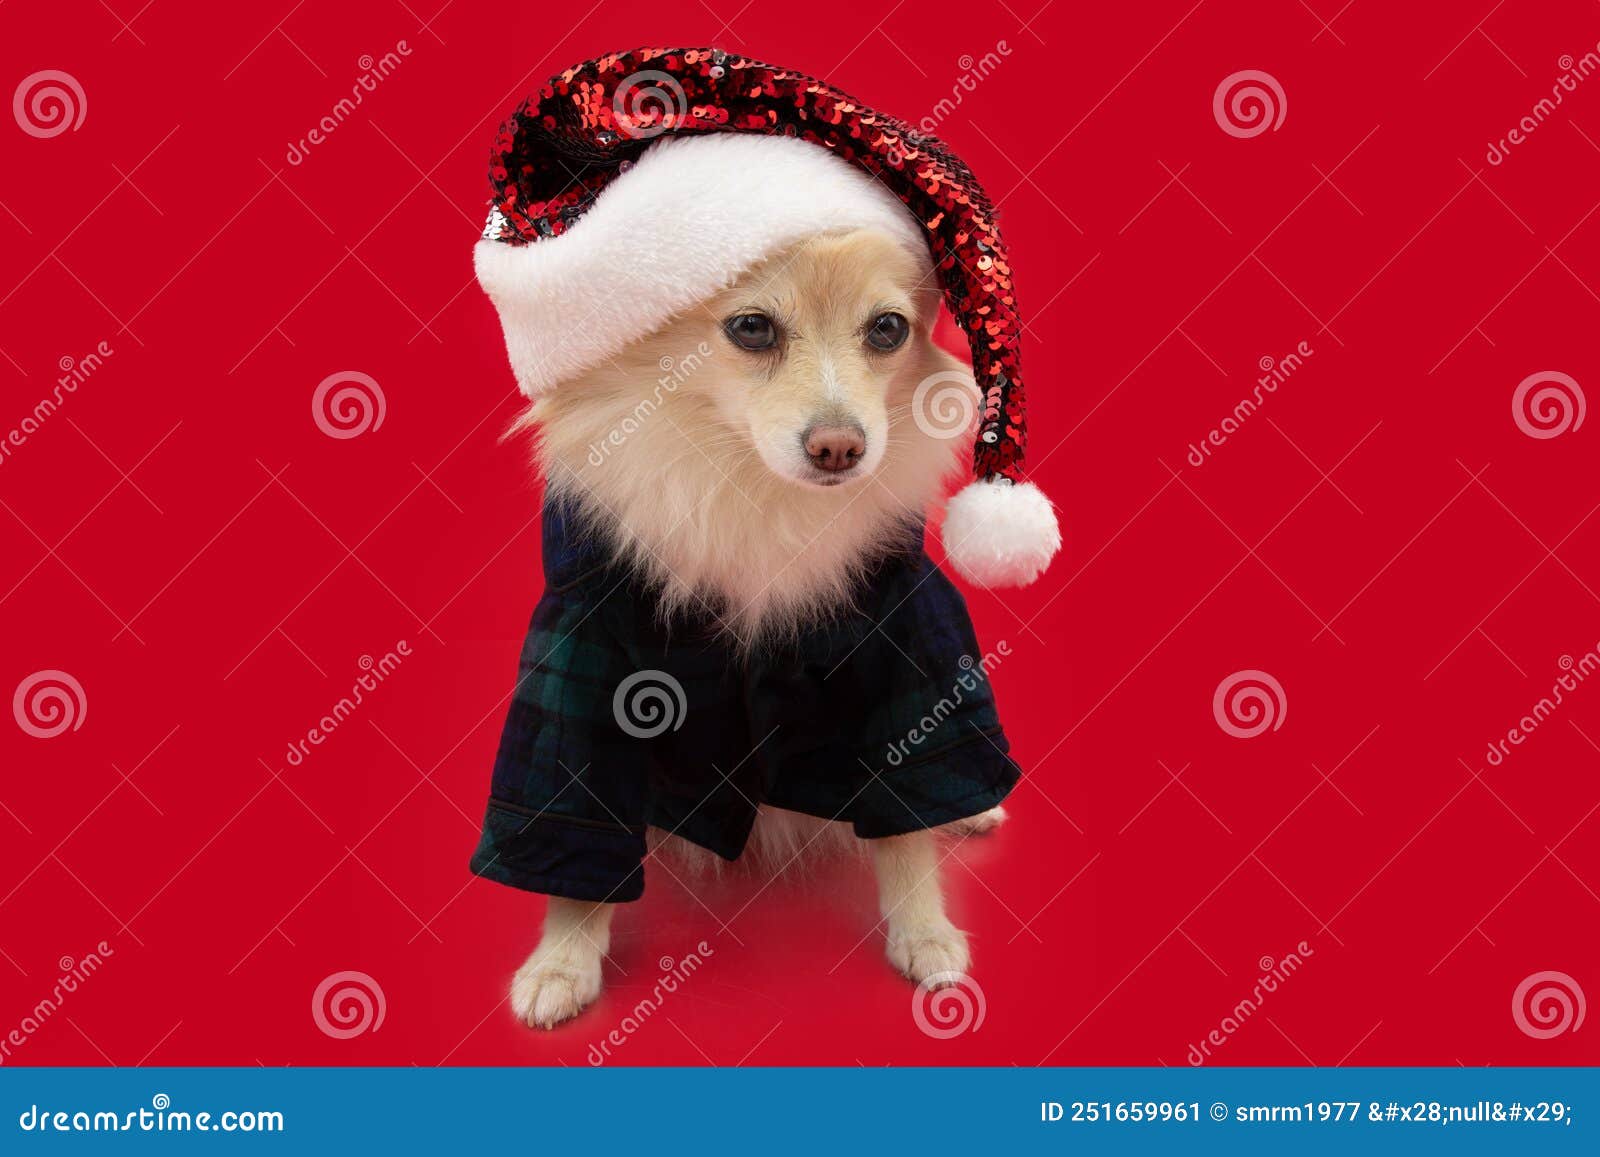 pomeranian dog celebrating christmas with a checkered pijama and santa claus hat.  on red background